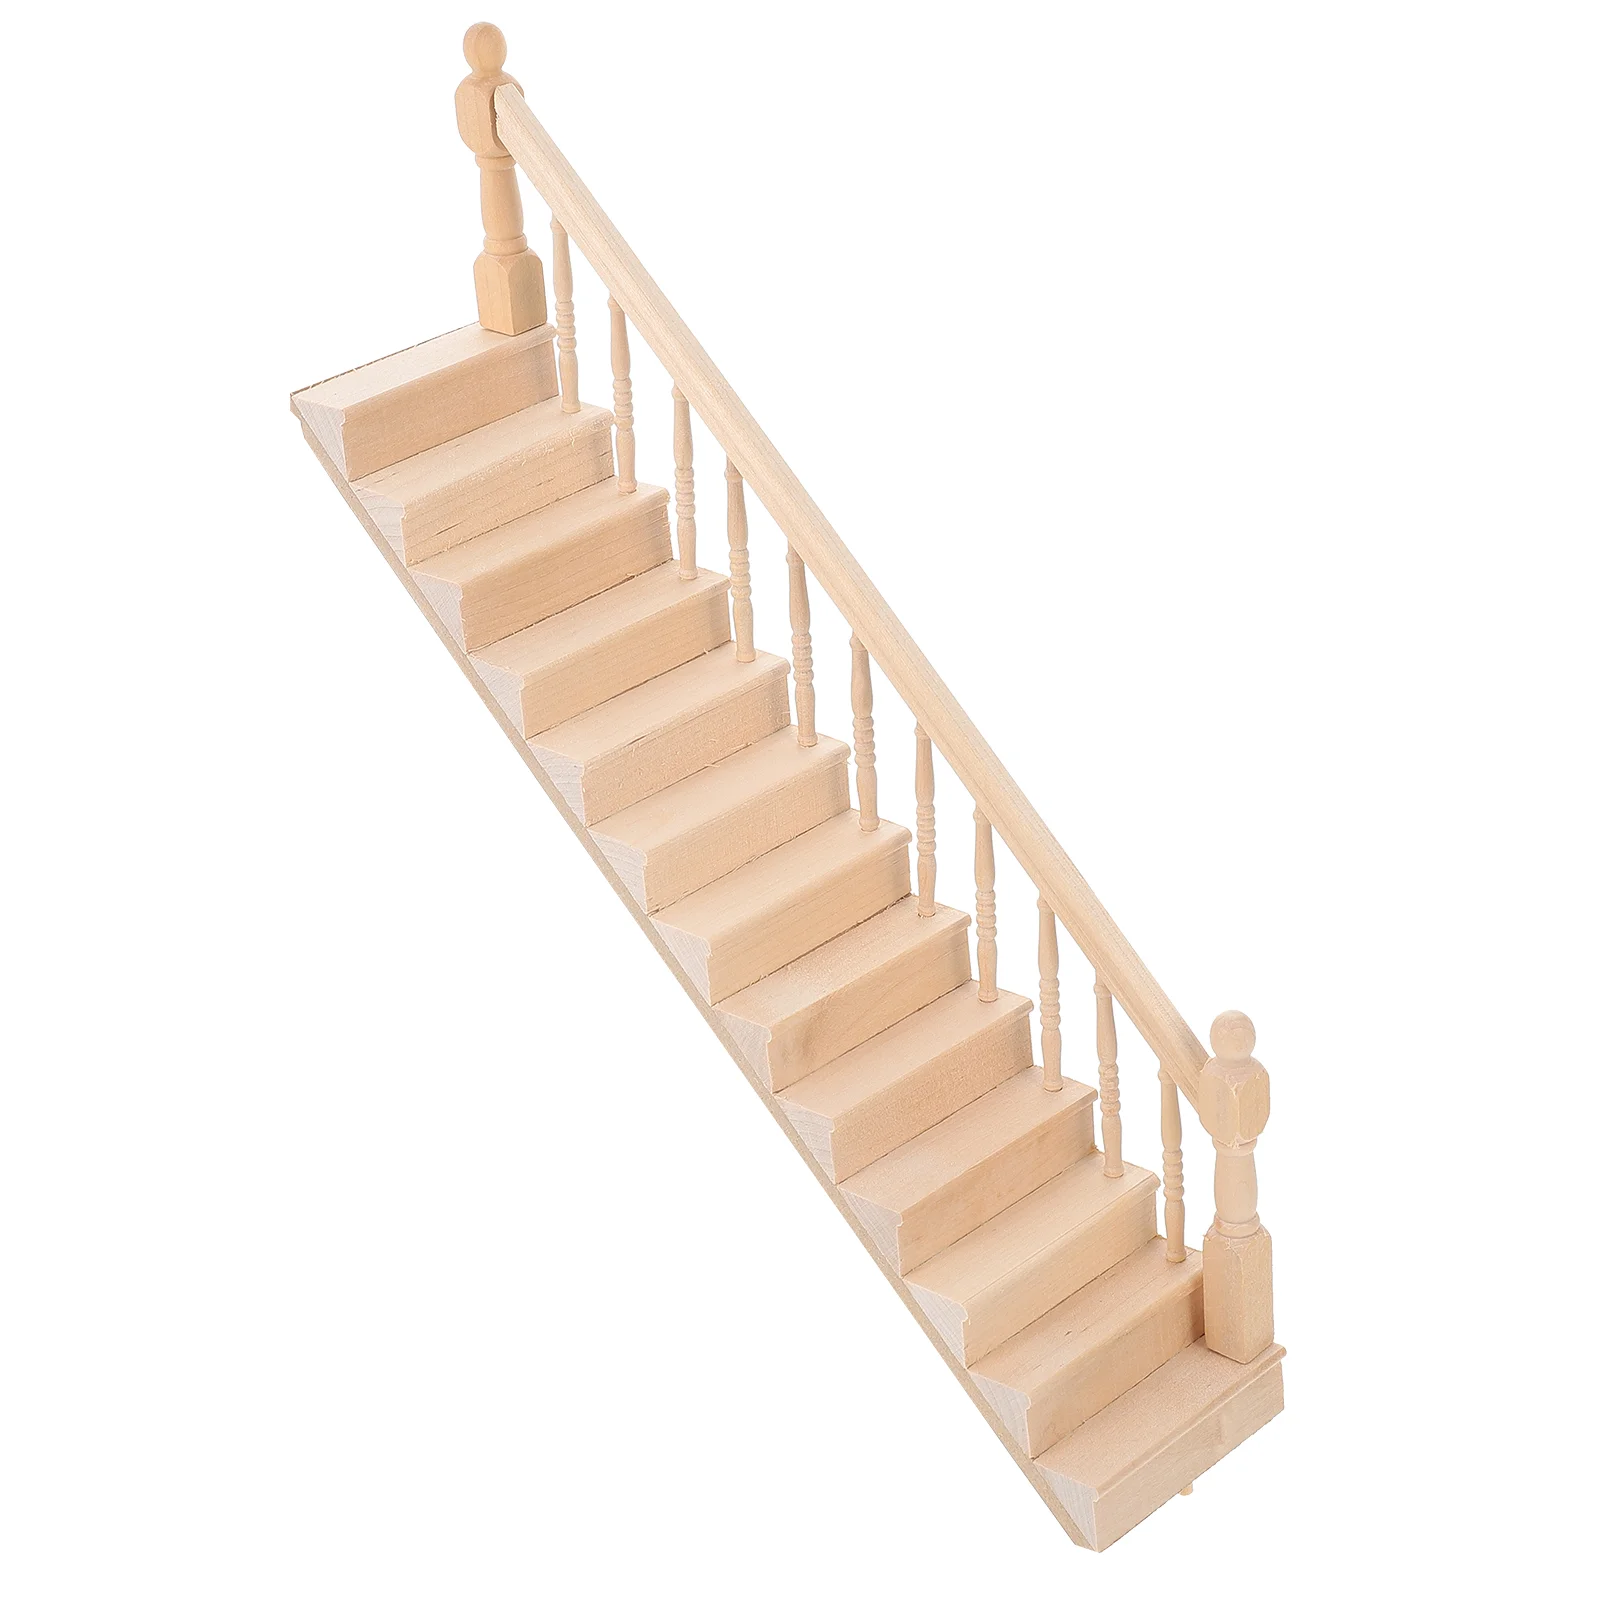 

Furniture Accessories House Stair Railing Kids Toys Bulk Wooden Staircase Model